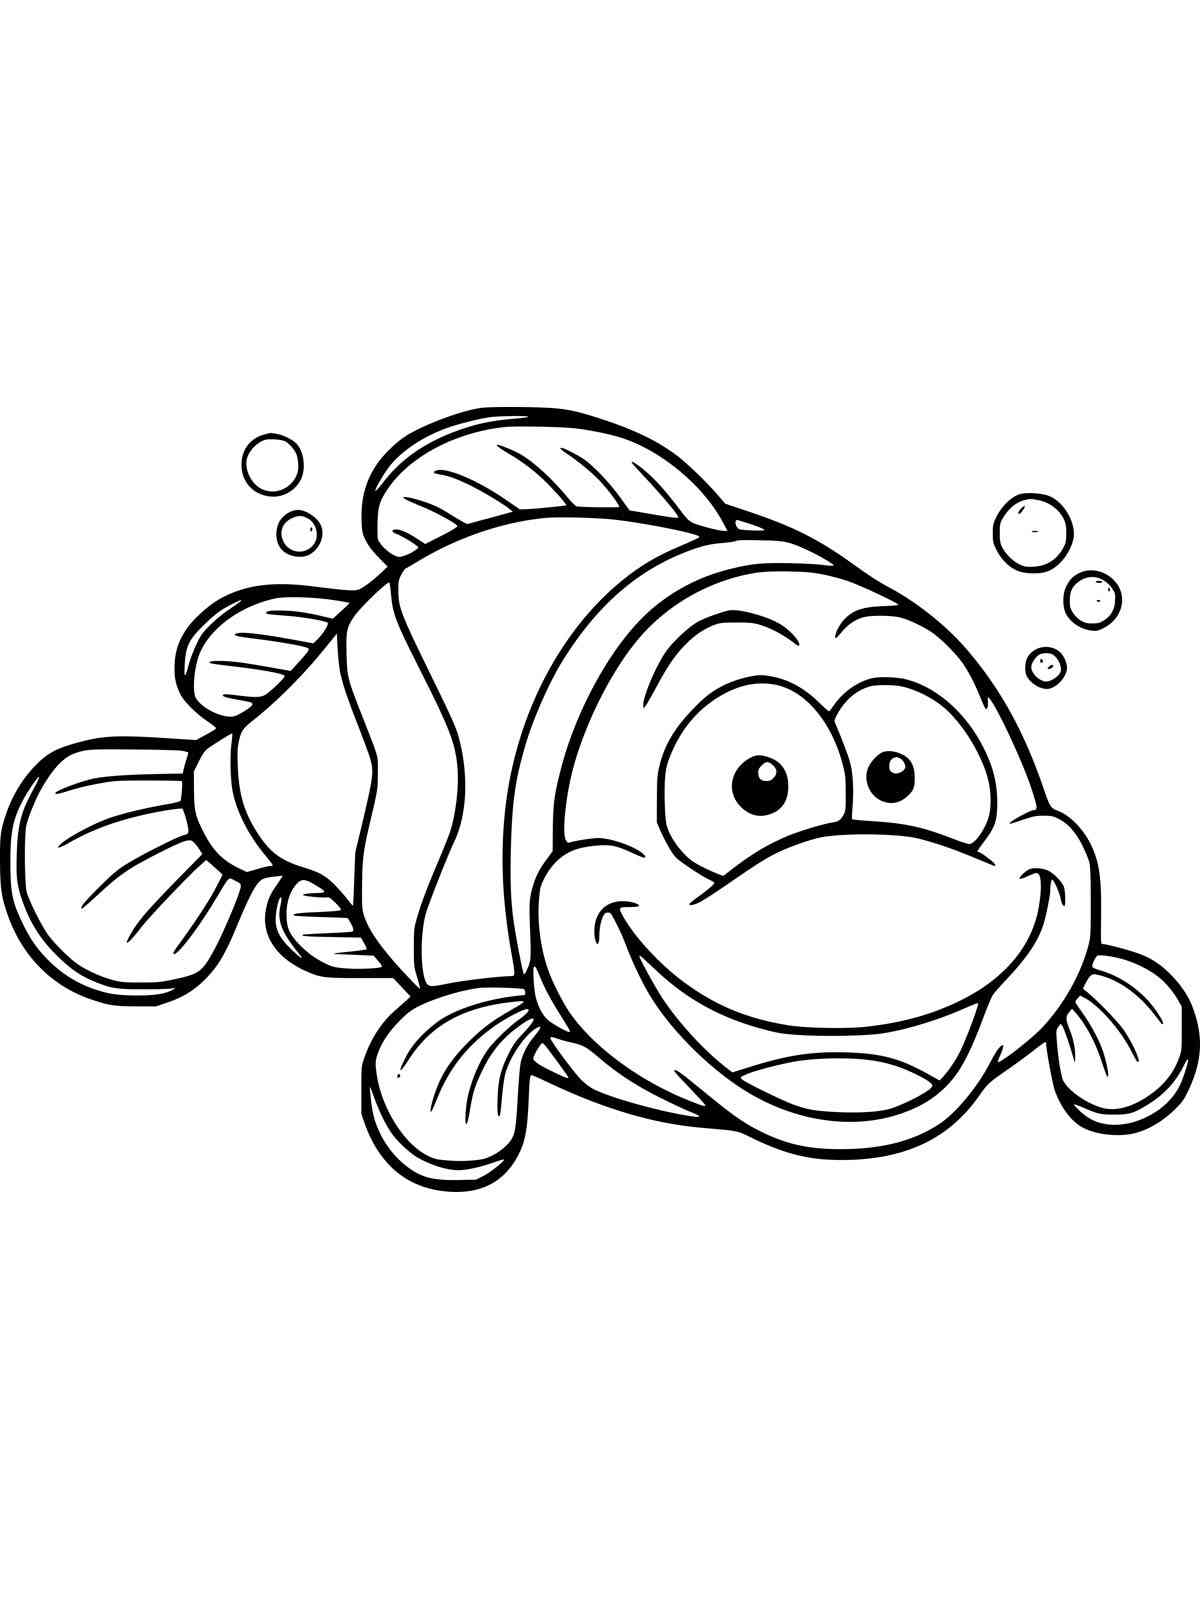 Clownfish 17 coloring page